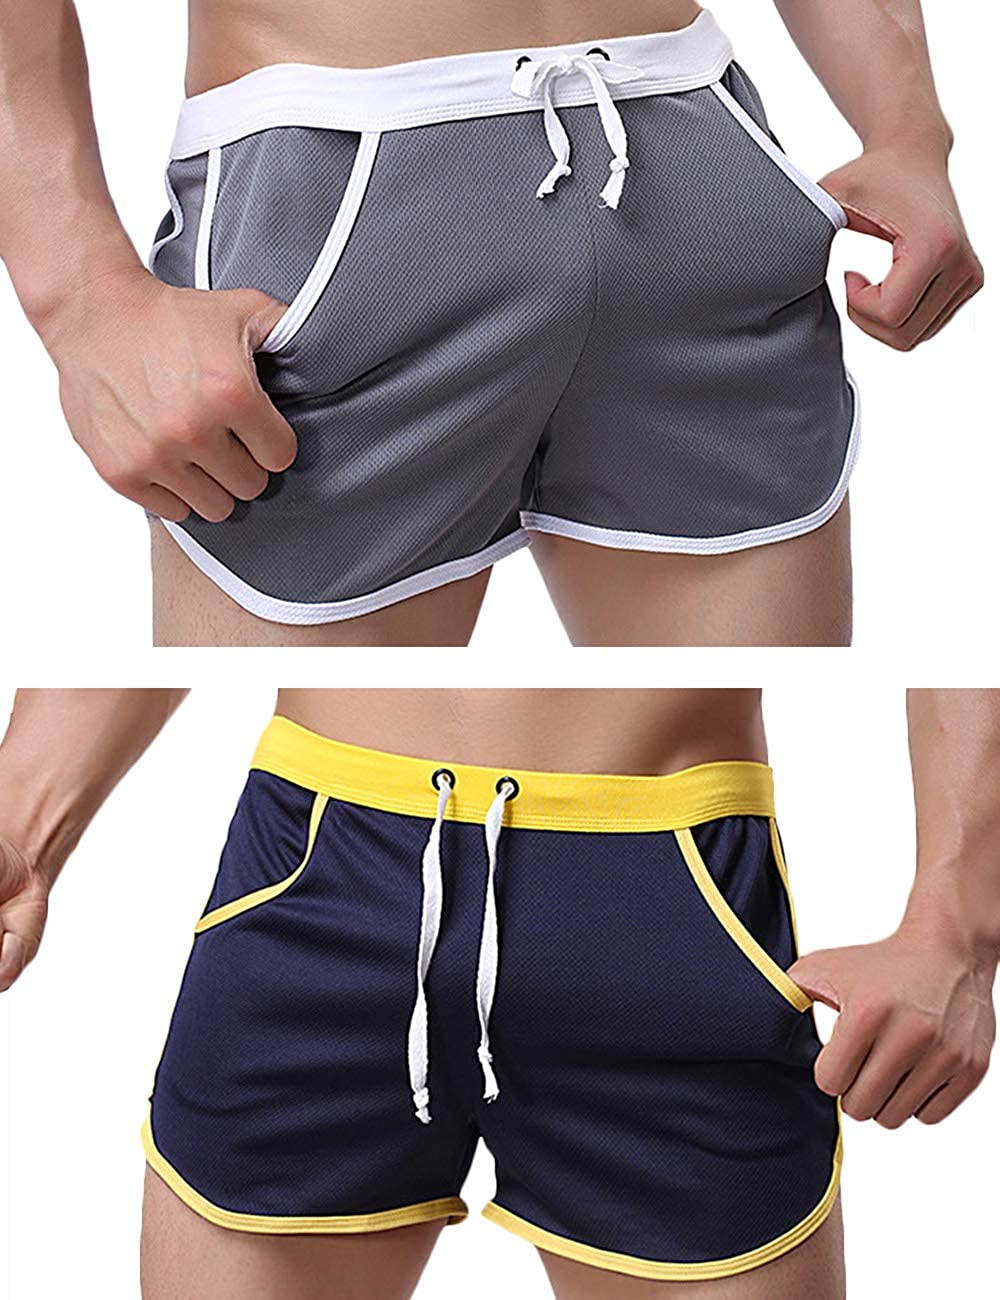 Rexcyril Mens Running Workout Shorts Mesh Bodybuilding Gym Fitness Training Short Pants 